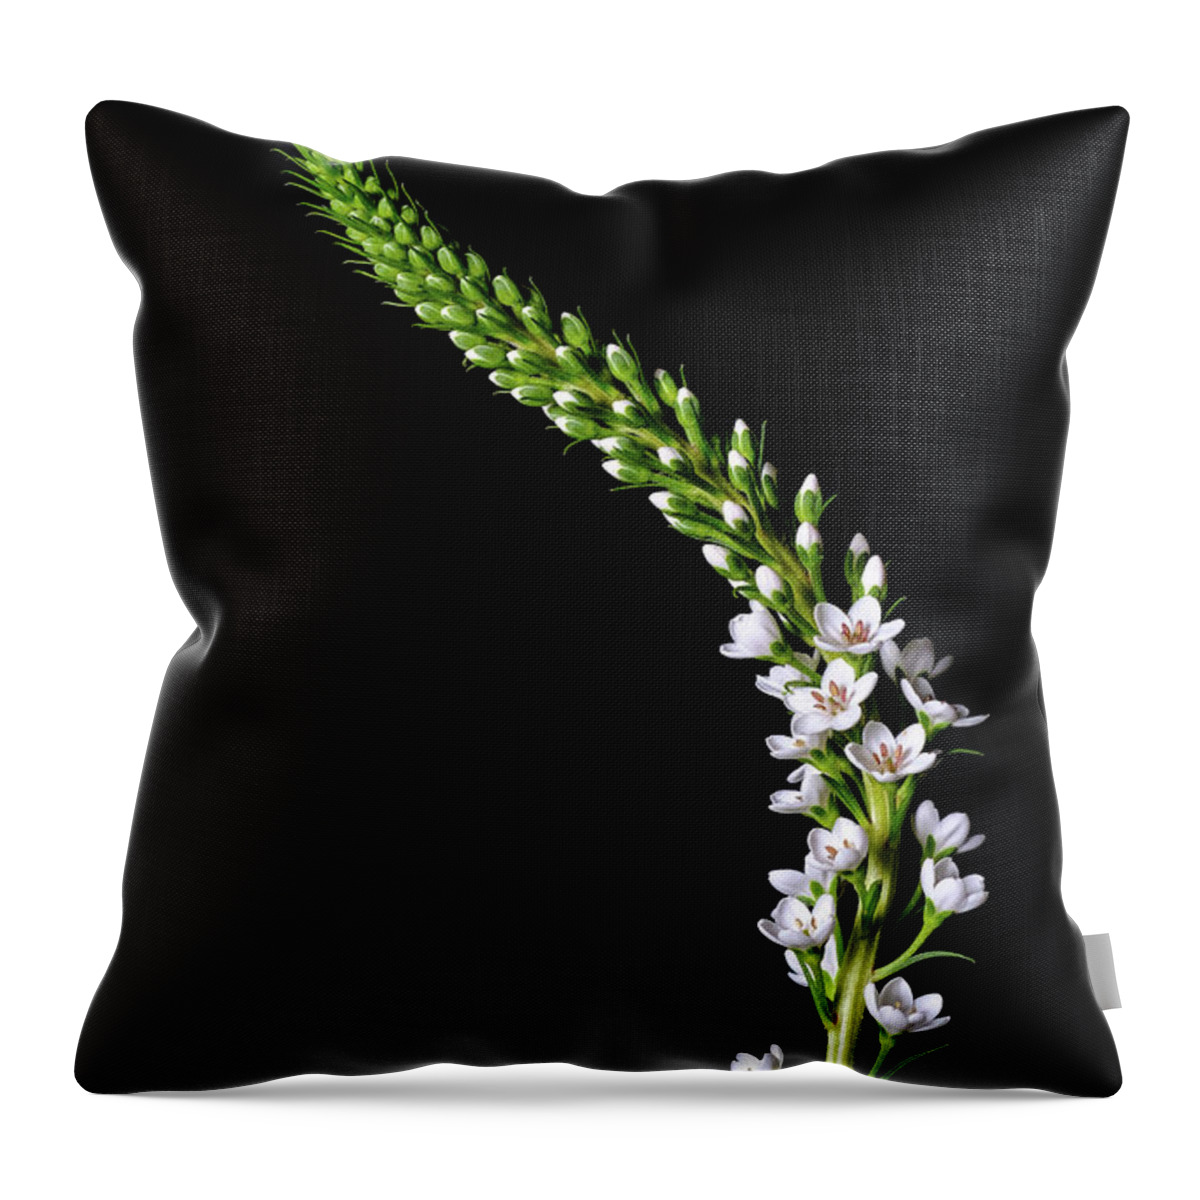 Flowers Throw Pillow featuring the photograph Botanicals 11 by Connie Carr